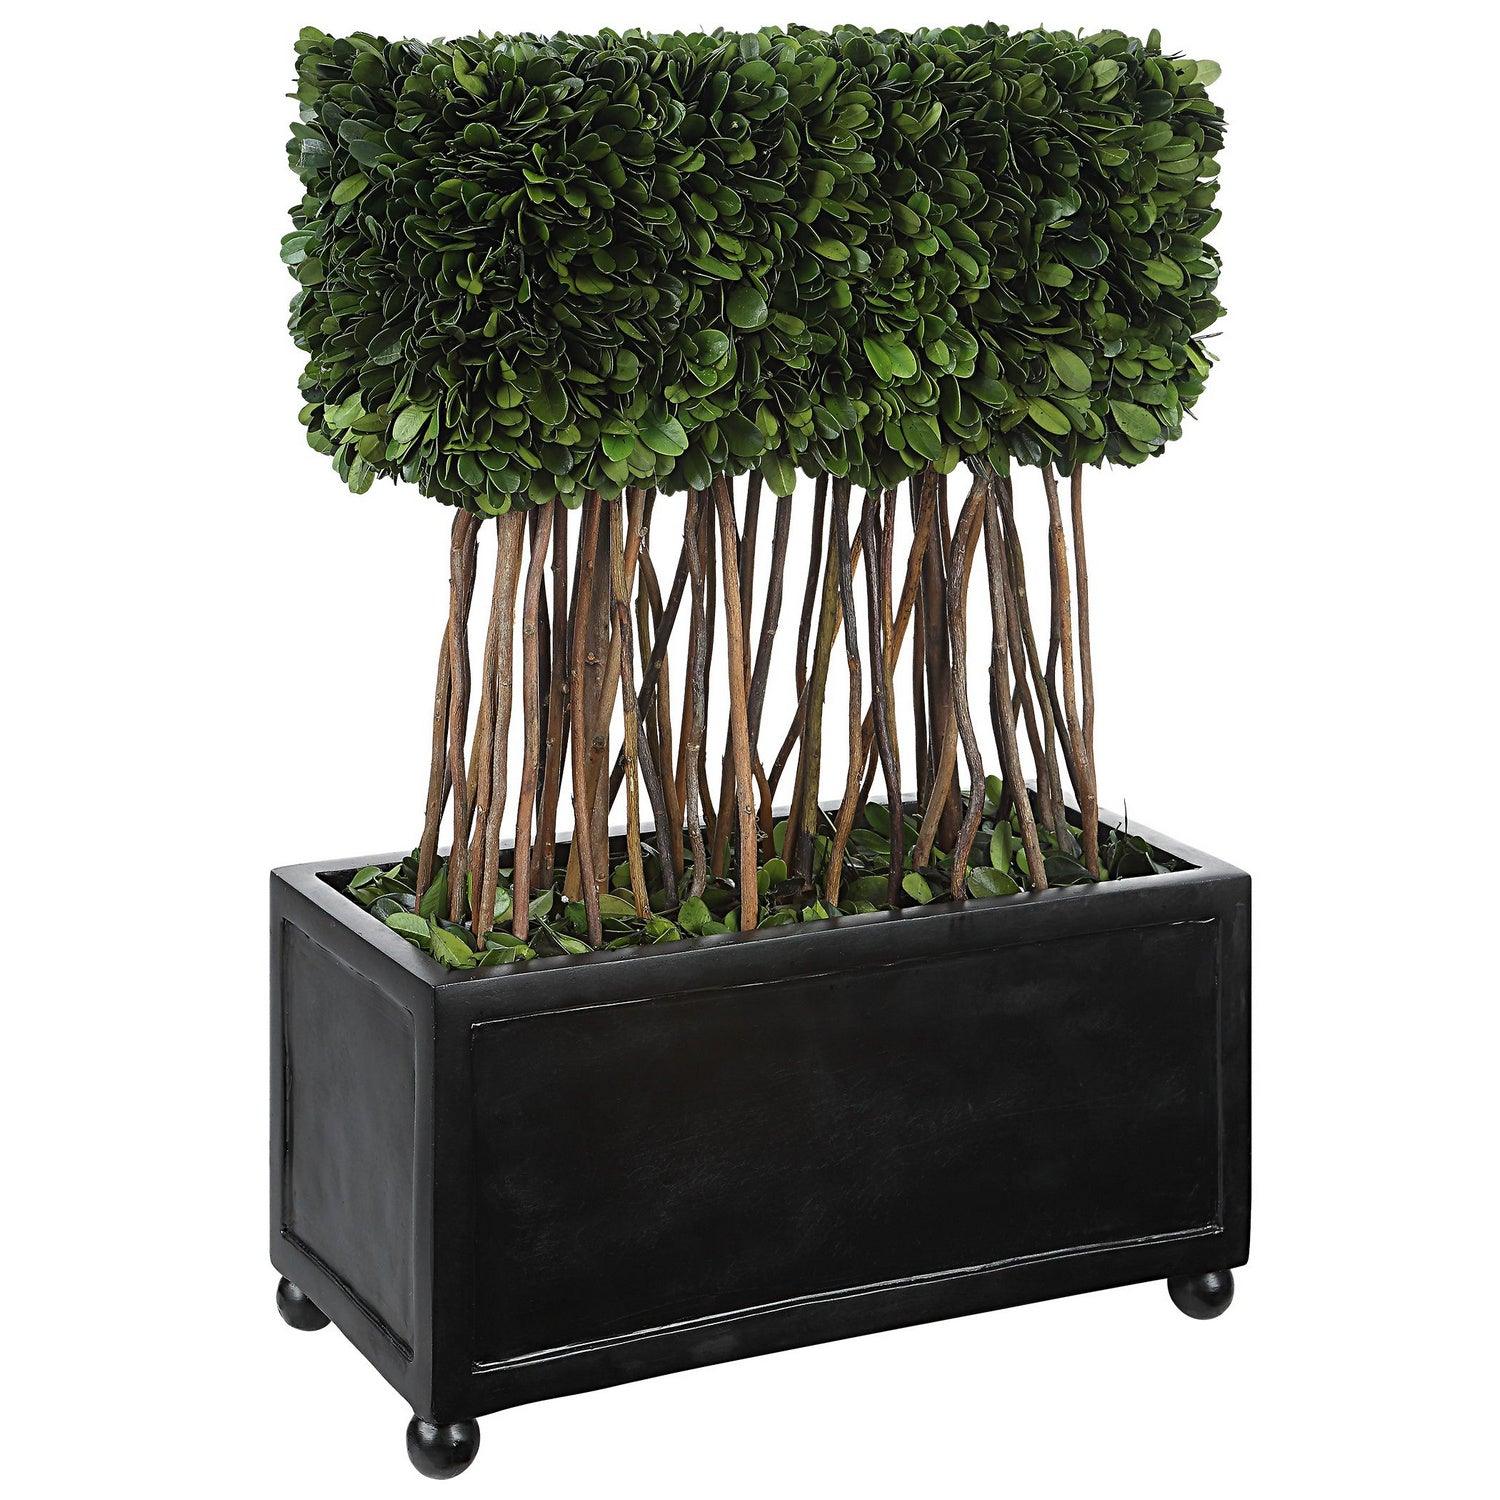 The Uttermost - PreservedBoxwood Topiary - 60188 | Montreal Lighting & Hardware